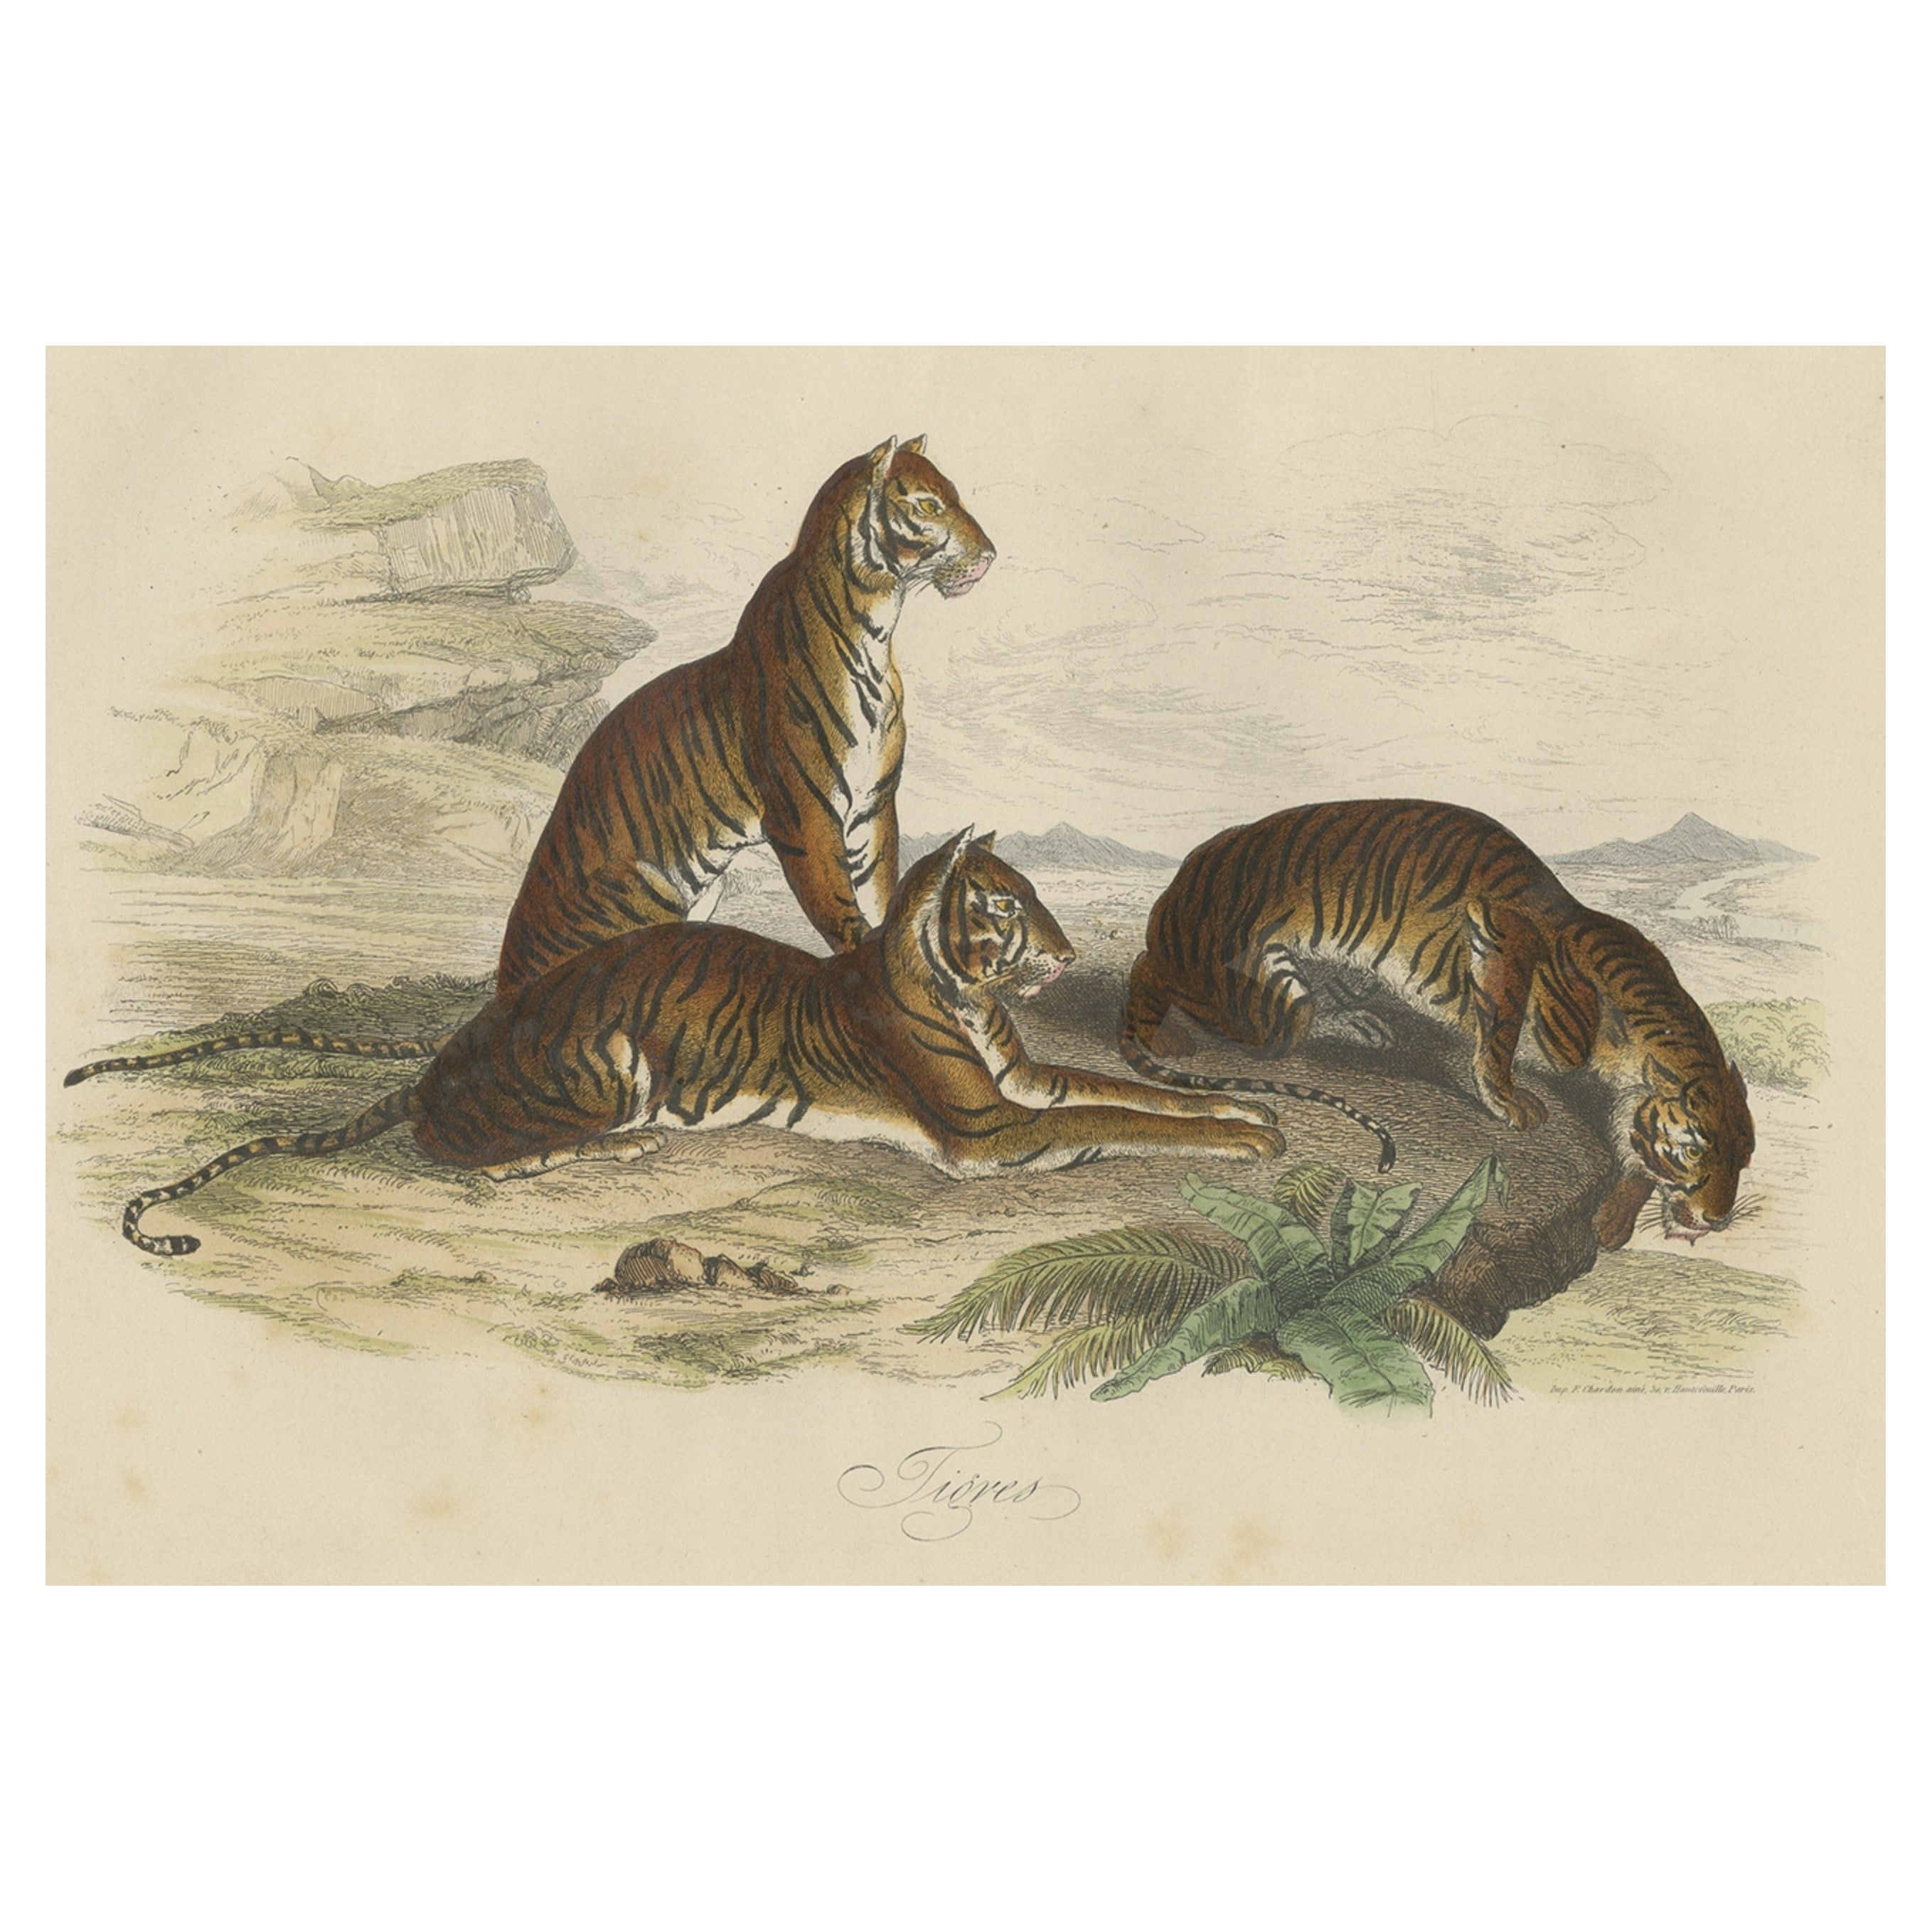 Antique Hand-Colored Print of Tigers, 1854